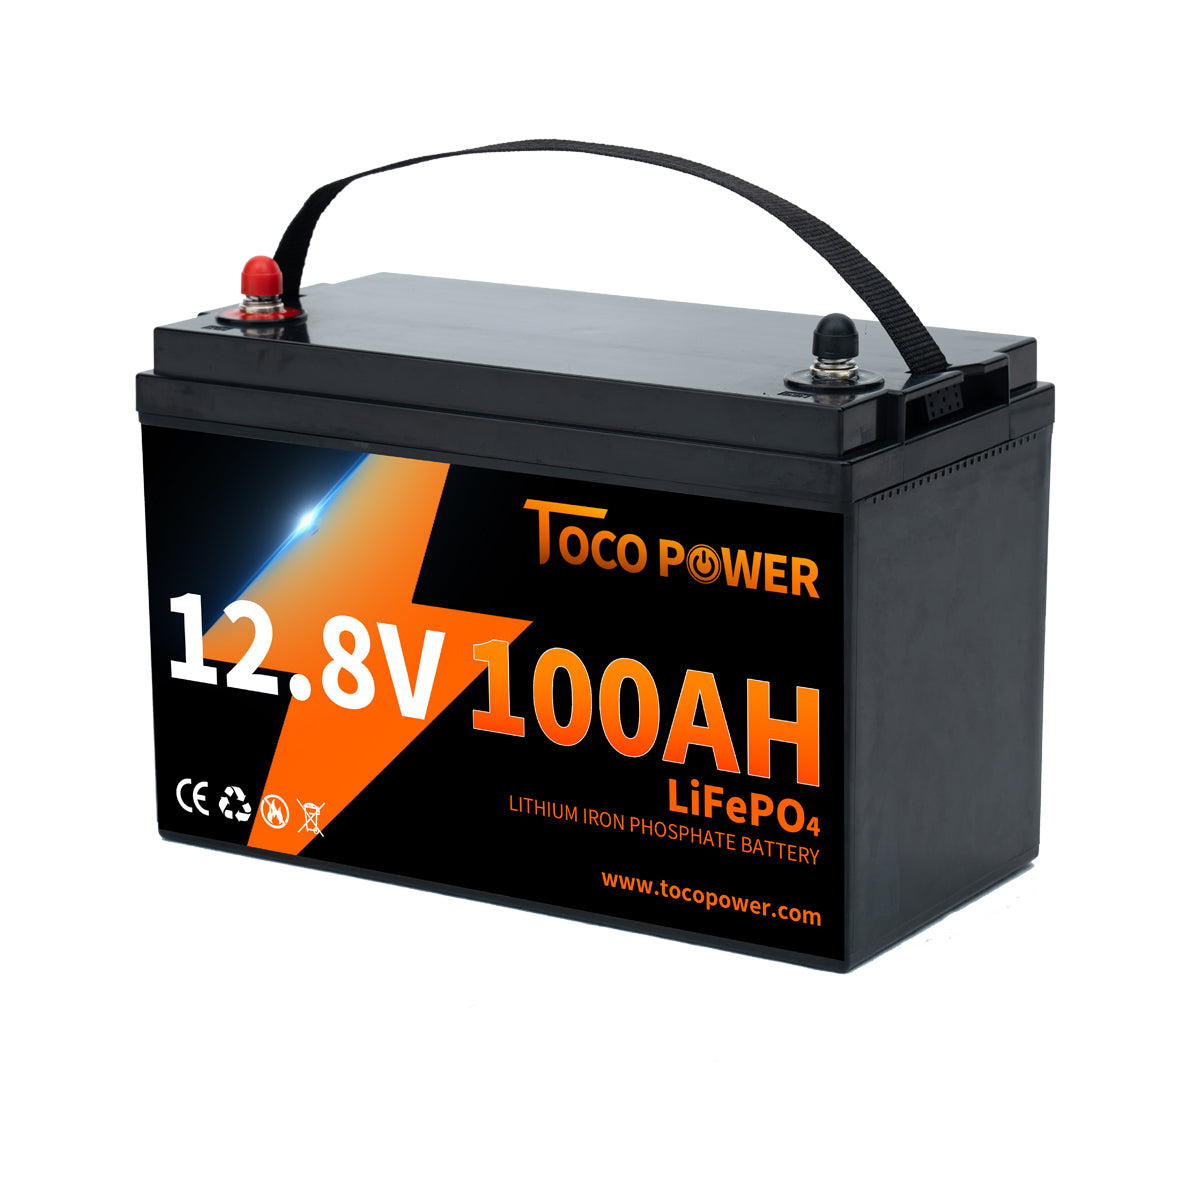 Tocopower 700W up 1100W Portable Power Station 384Wh LiFePO4 Battery